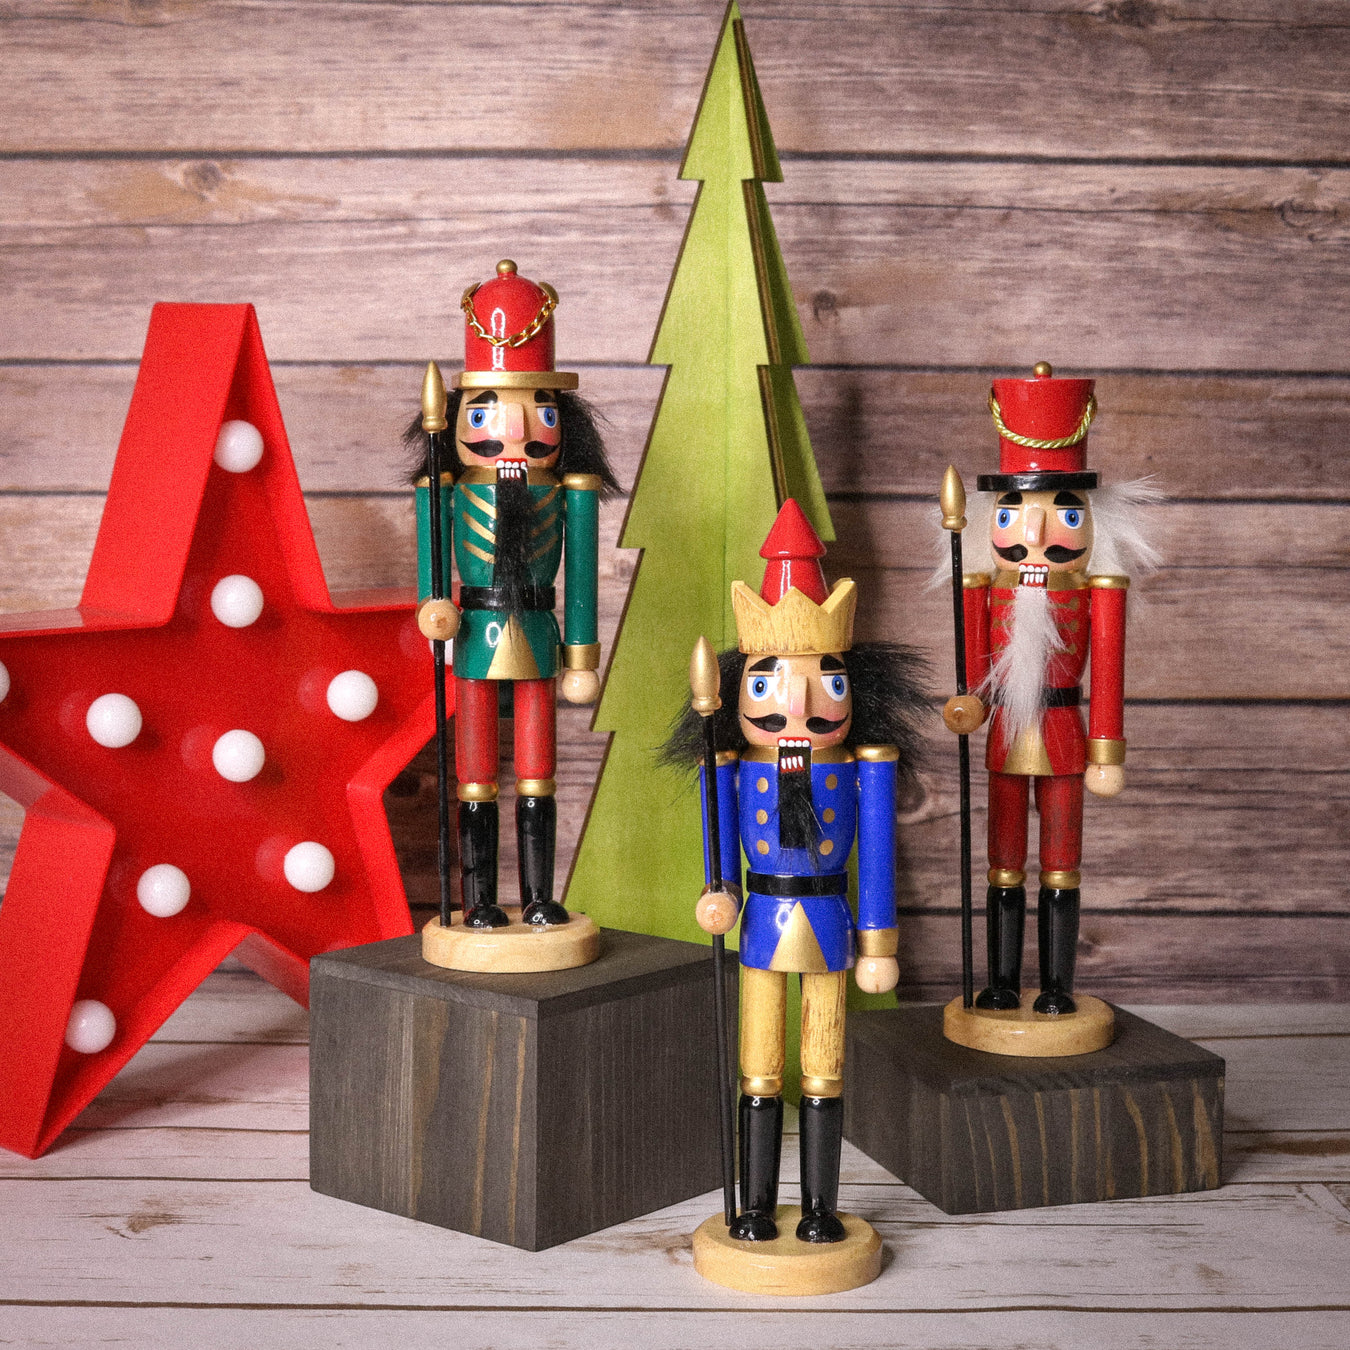 Christmas and Nutcracker Themed ornaments for decorating